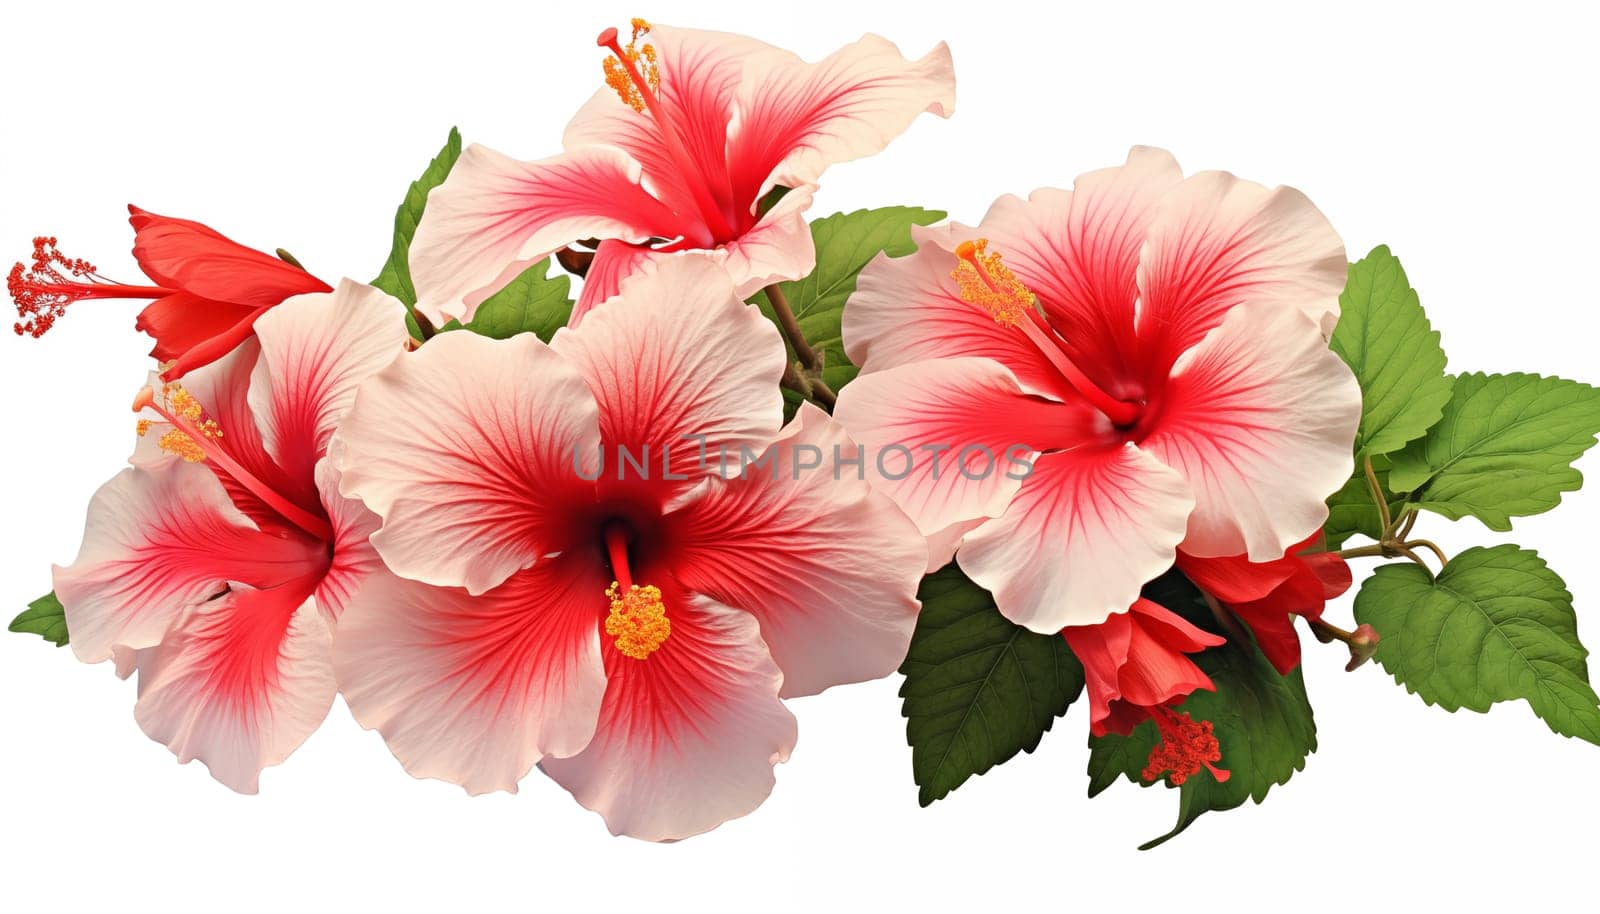 Hibiscus flowers white background isolated by Nadtochiy